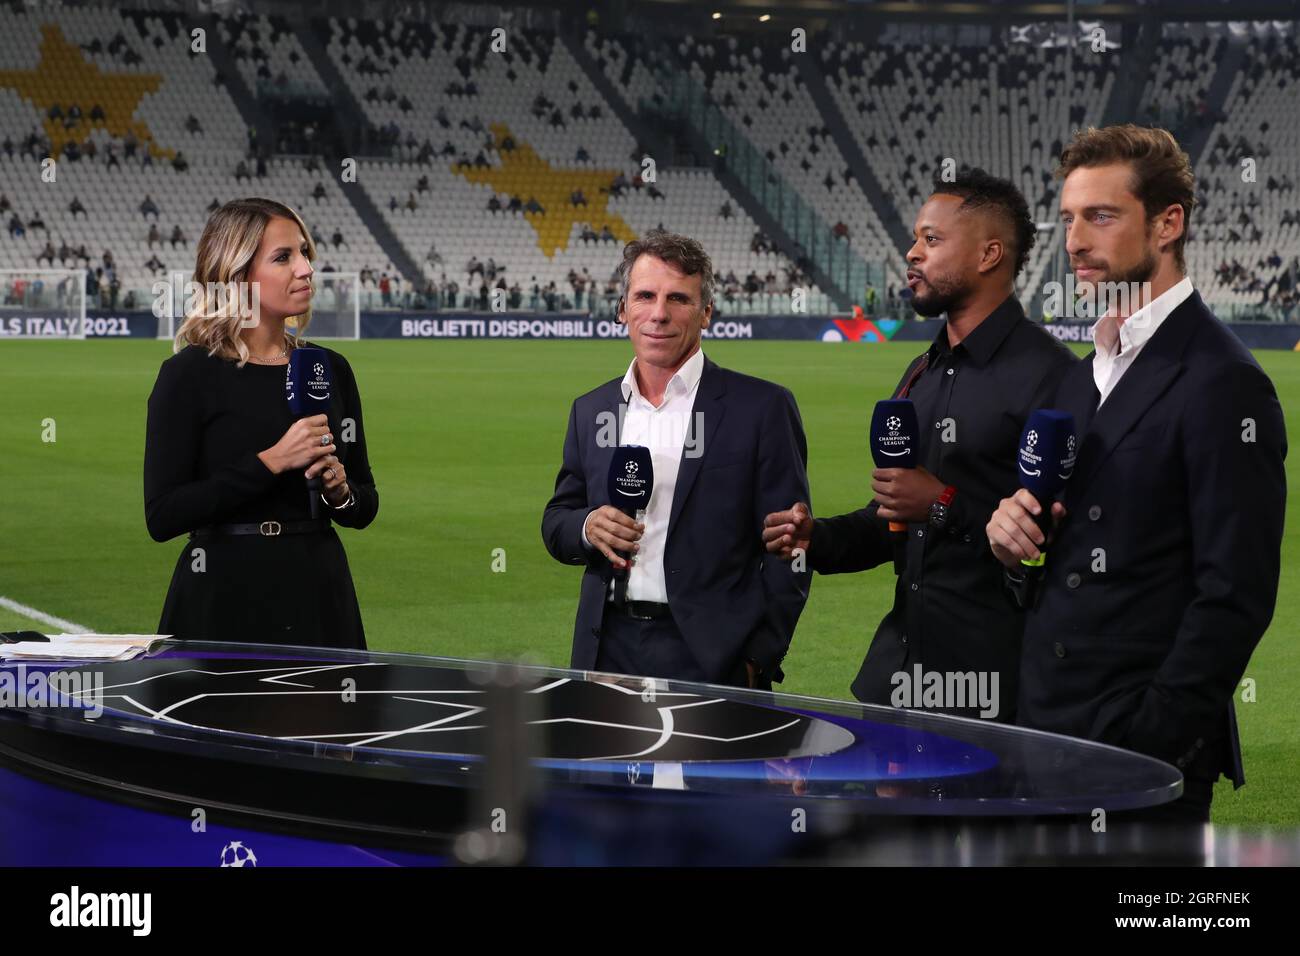 Turin, Italy. 29th Sep, 2021. The Amazon Prime commentary team ( L to R ):  Giulia Mizzoni, Gianfranco Zola, Patrice Evra and Claudio Marchisio comment  prior to the UEFA Champions League match